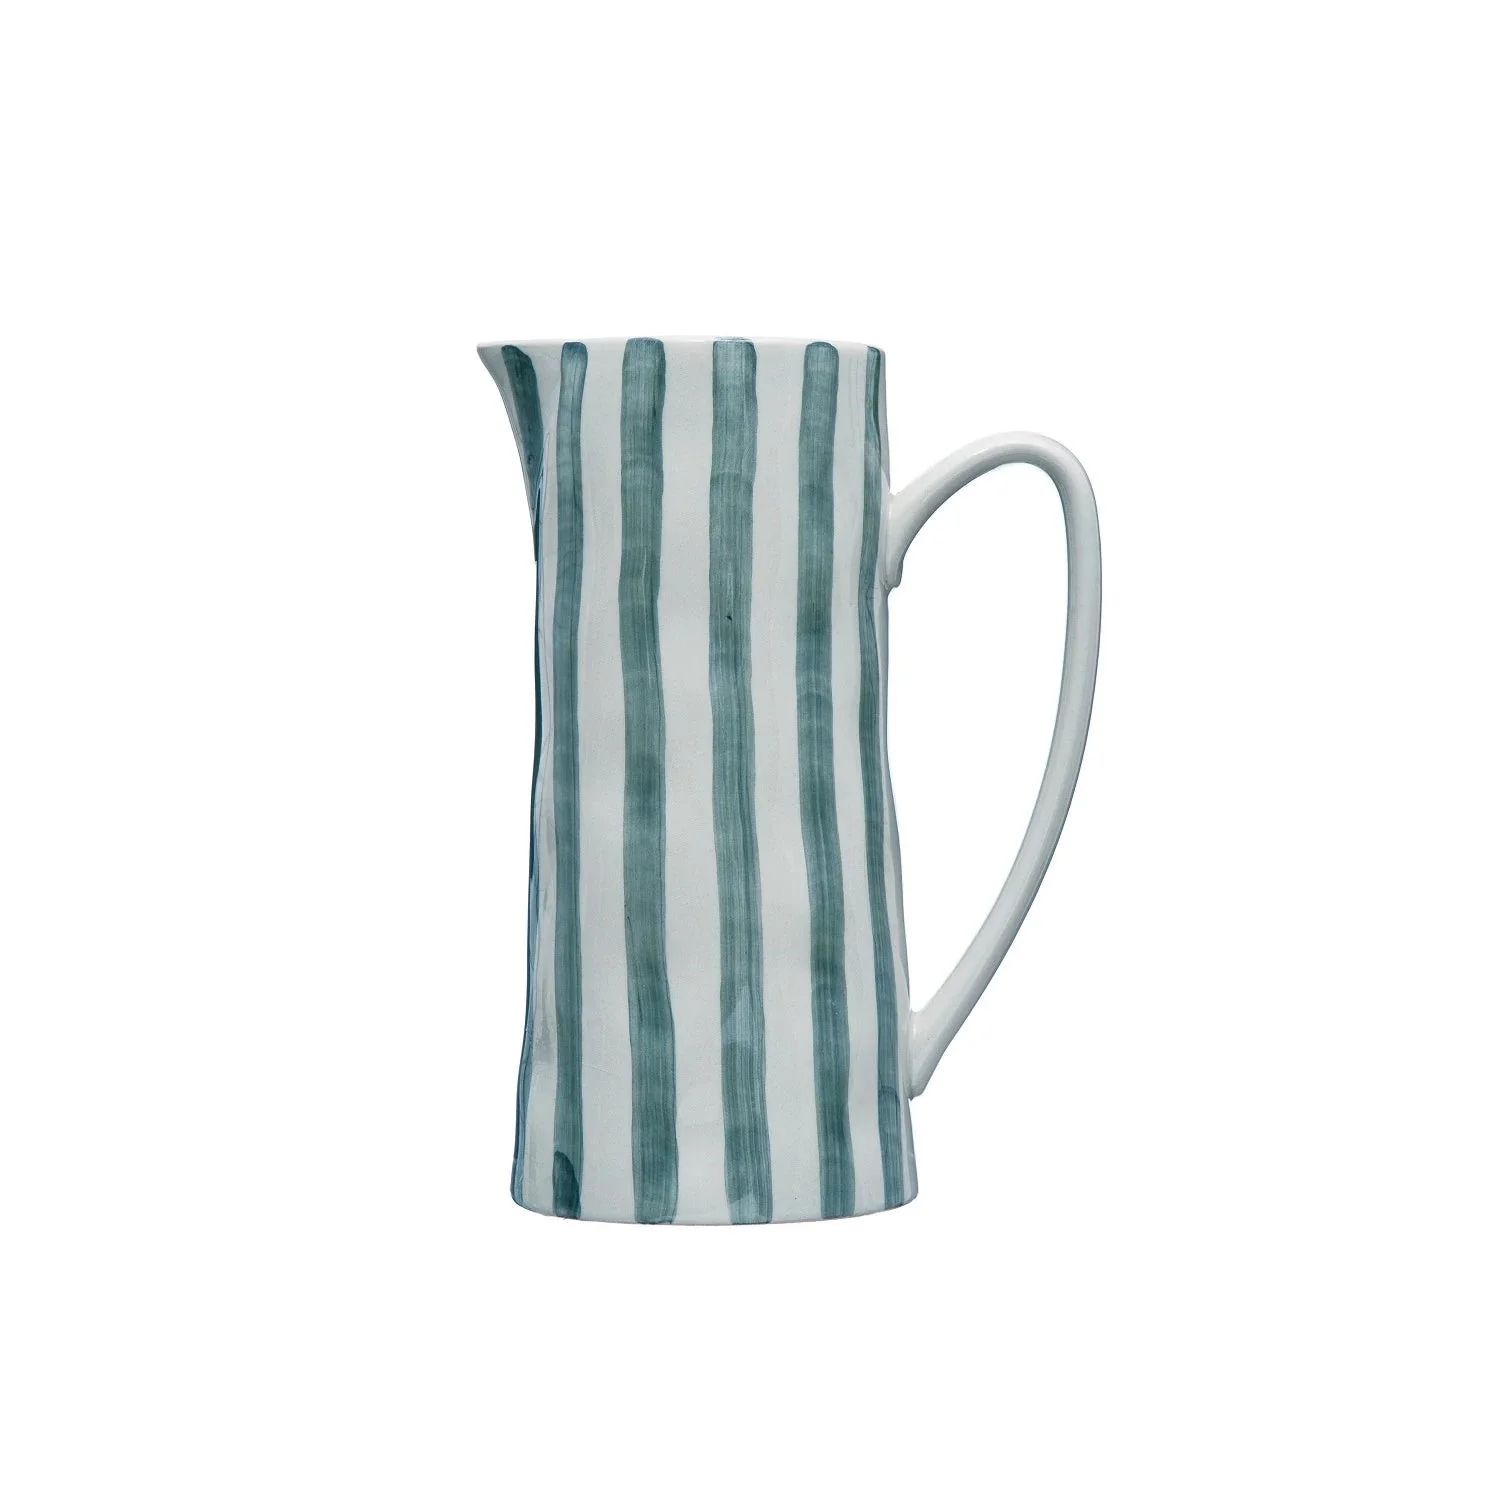 Hand-Painted Stoneware Pitcher with Stripes | Burke Decor